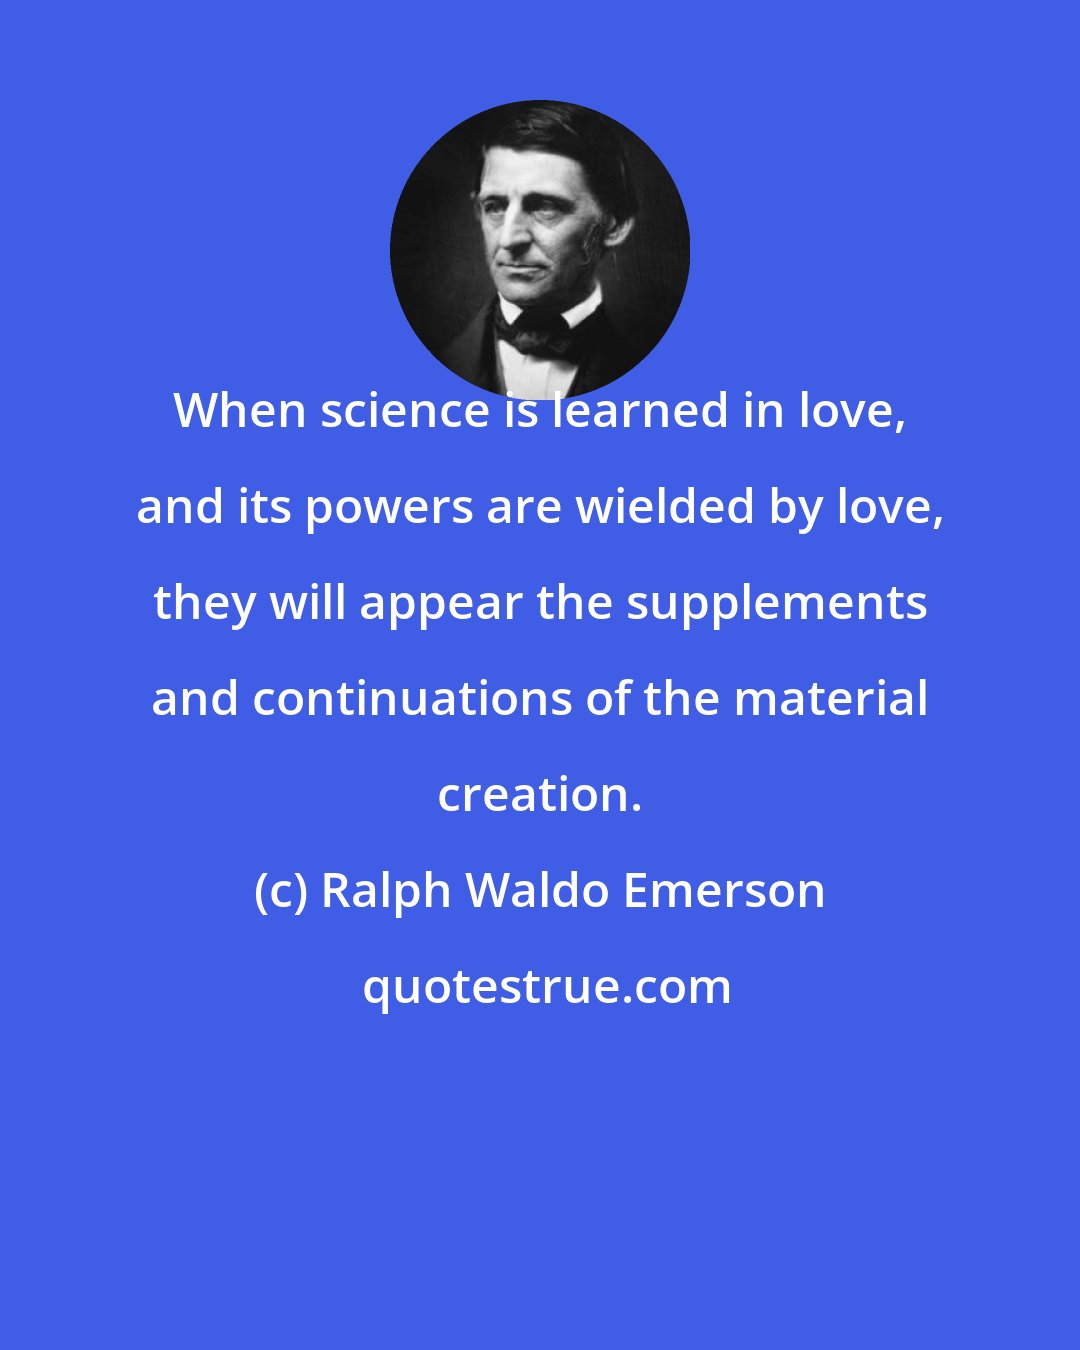 Ralph Waldo Emerson: When science is learned in love, and its powers are wielded by love, they will appear the supplements and continuations of the material creation.